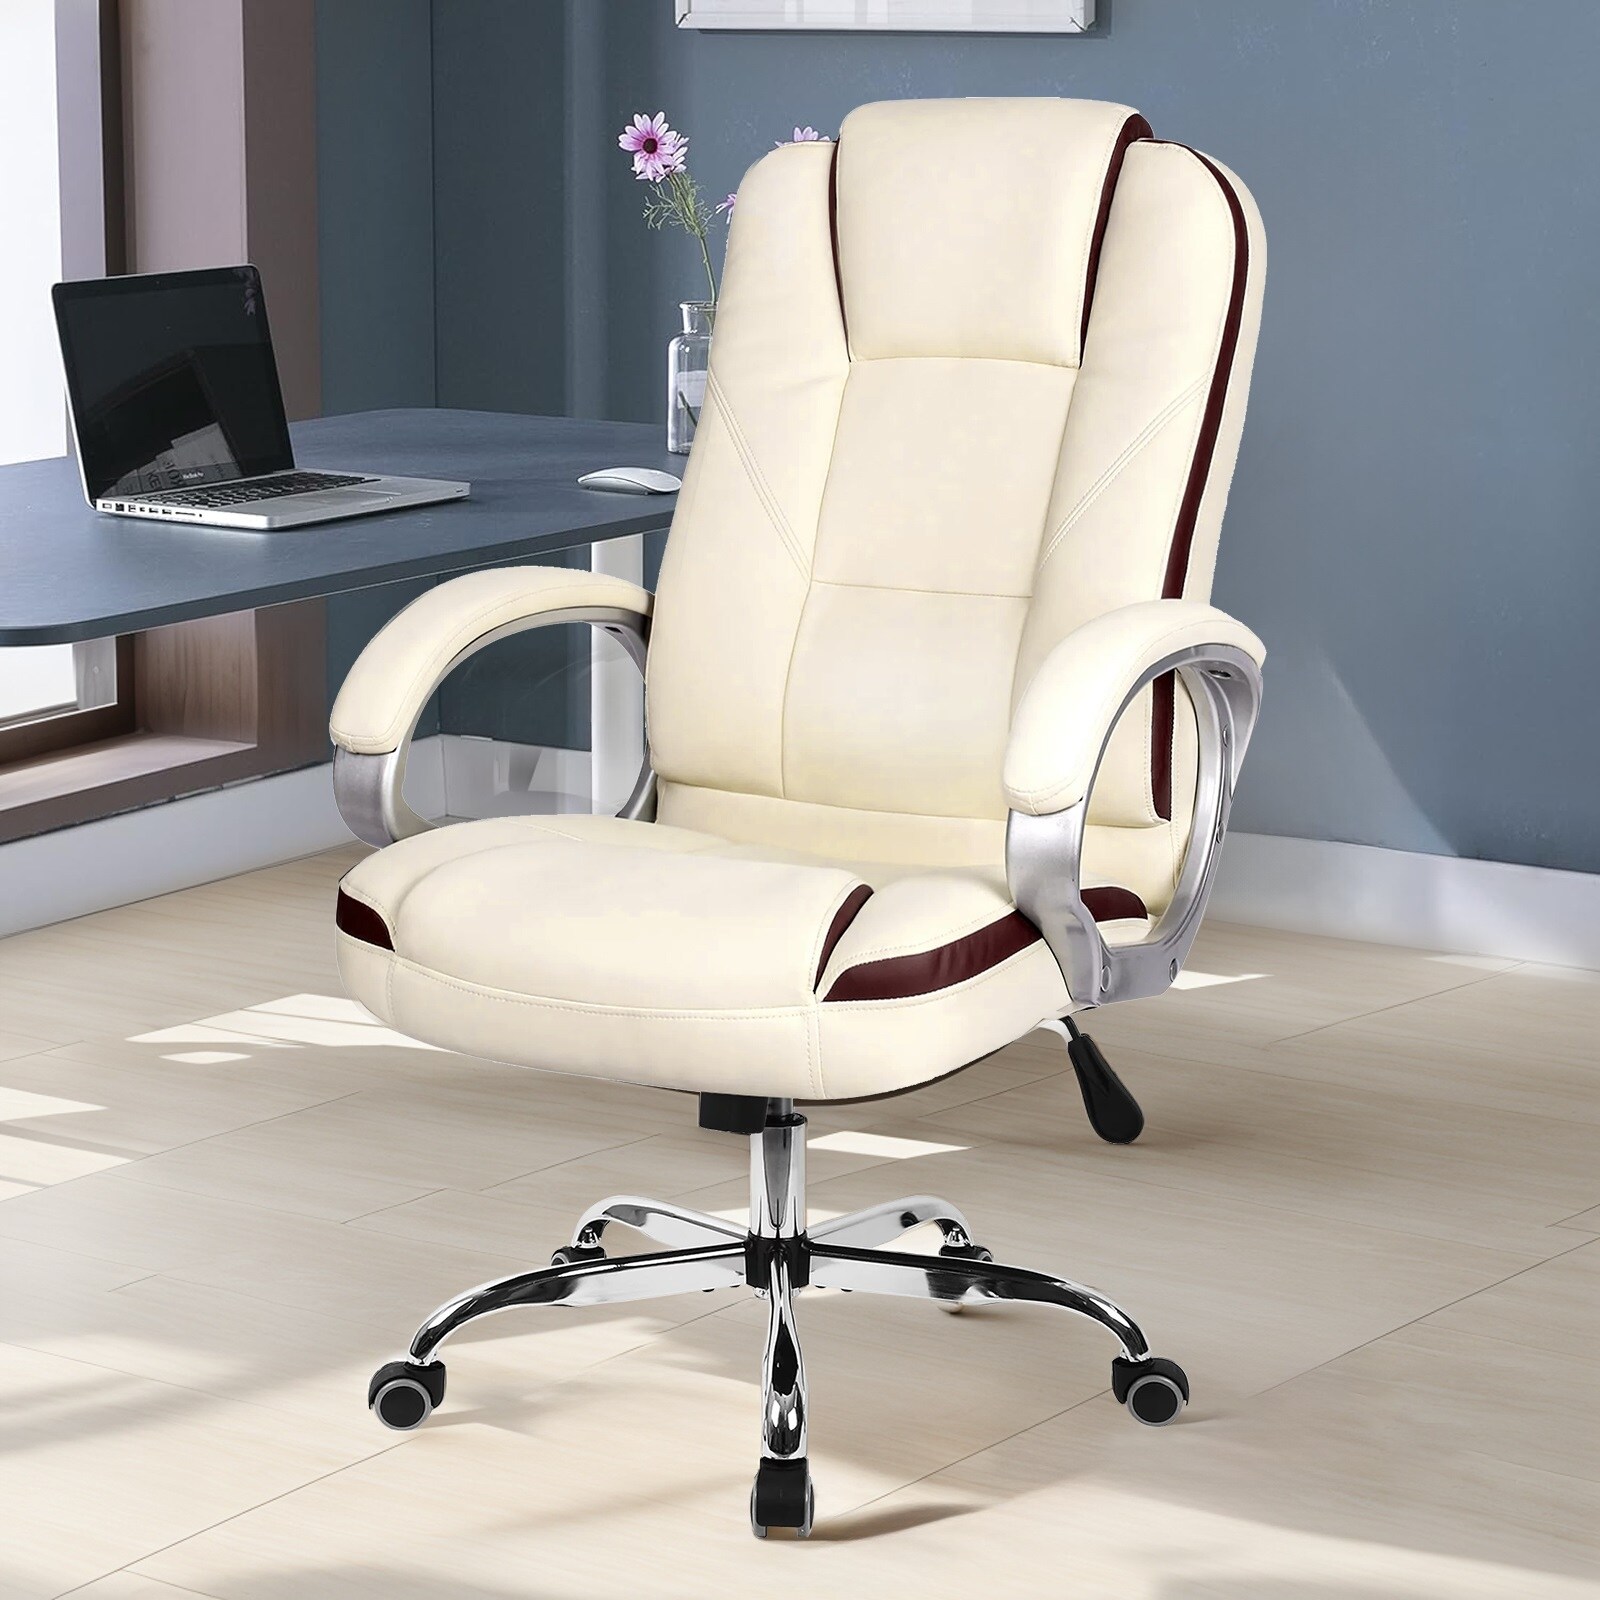 https://ak1.ostkcdn.com/images/products/is/images/direct/311ad64c6cda5485aab59b71720cc8af993b9ea4/Office-Chair%2C-Ergonomic-Desk-Chair%2C-High-Back-Faux-Leather-Task-Chairs-for-Home-Office-for-Adult-Working-Study.jpg